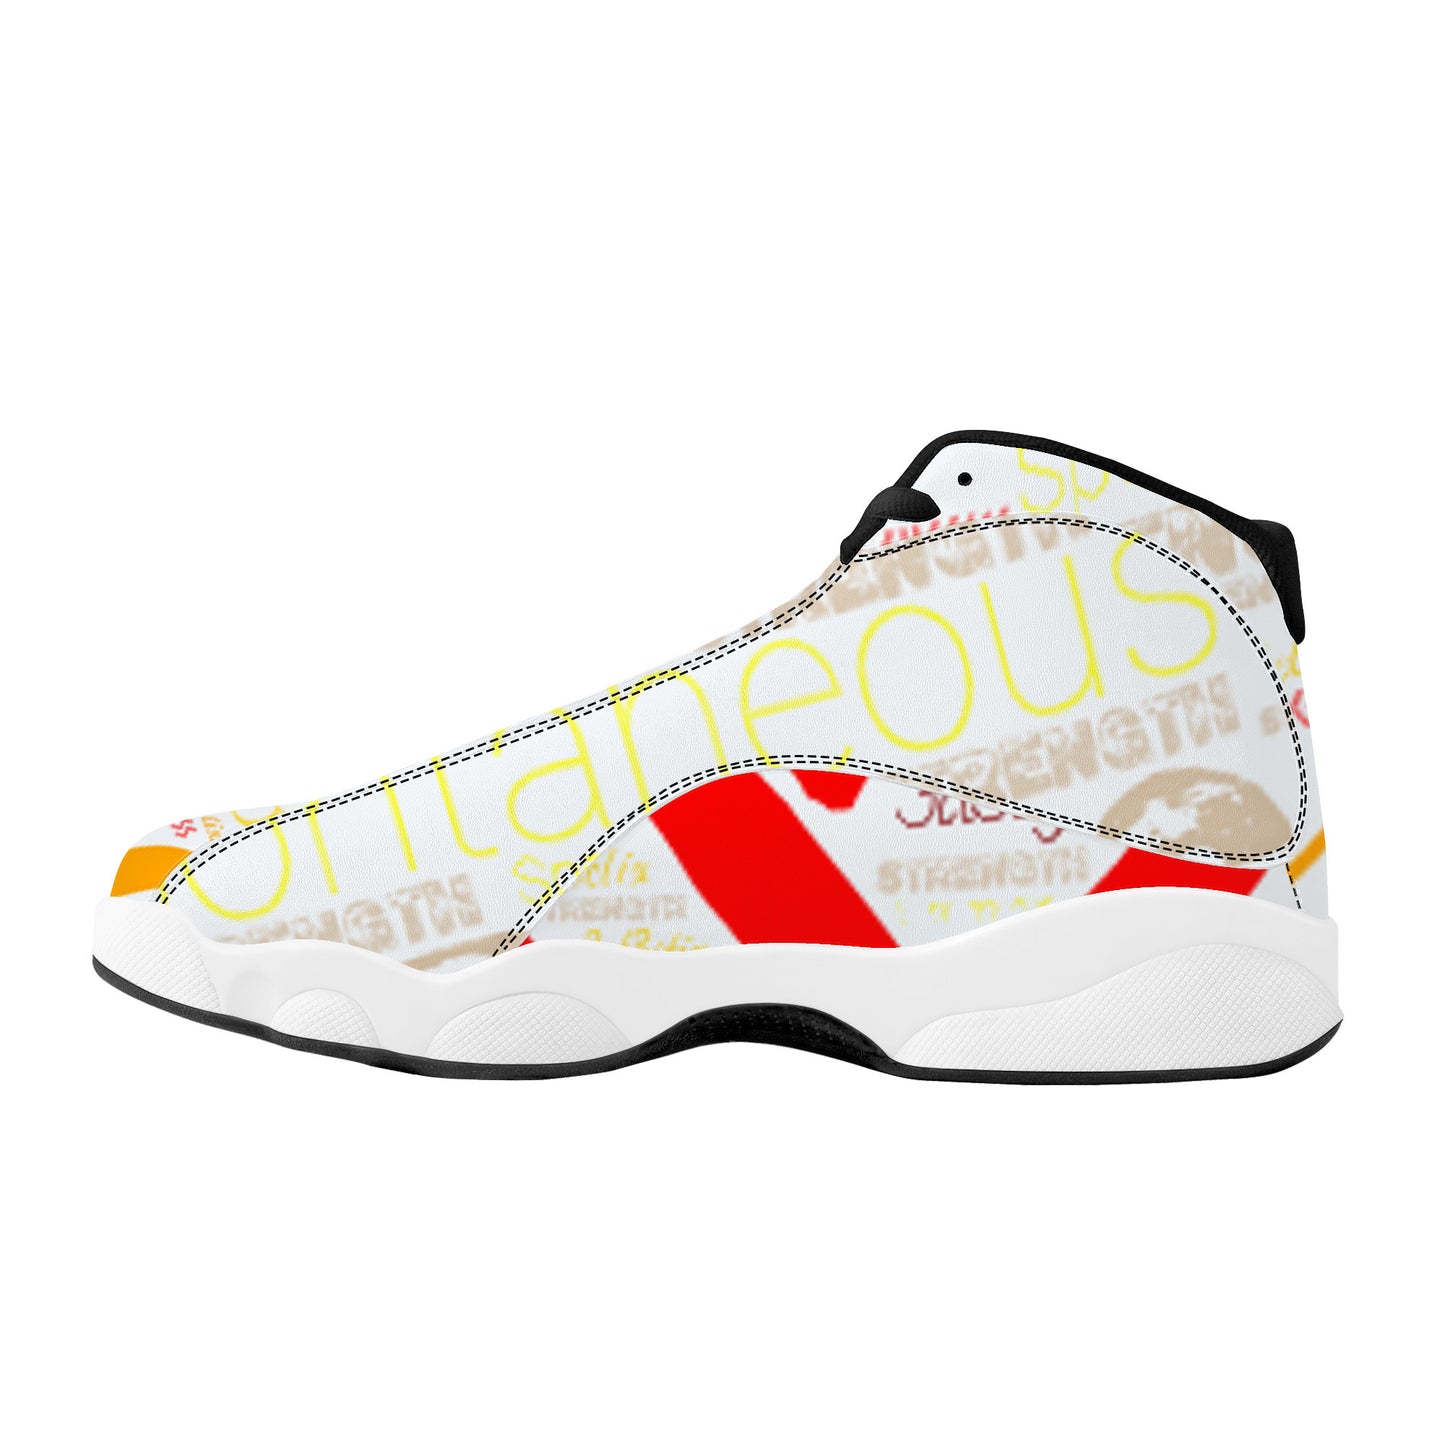 SF_D89 Basketball Shoes - Branded